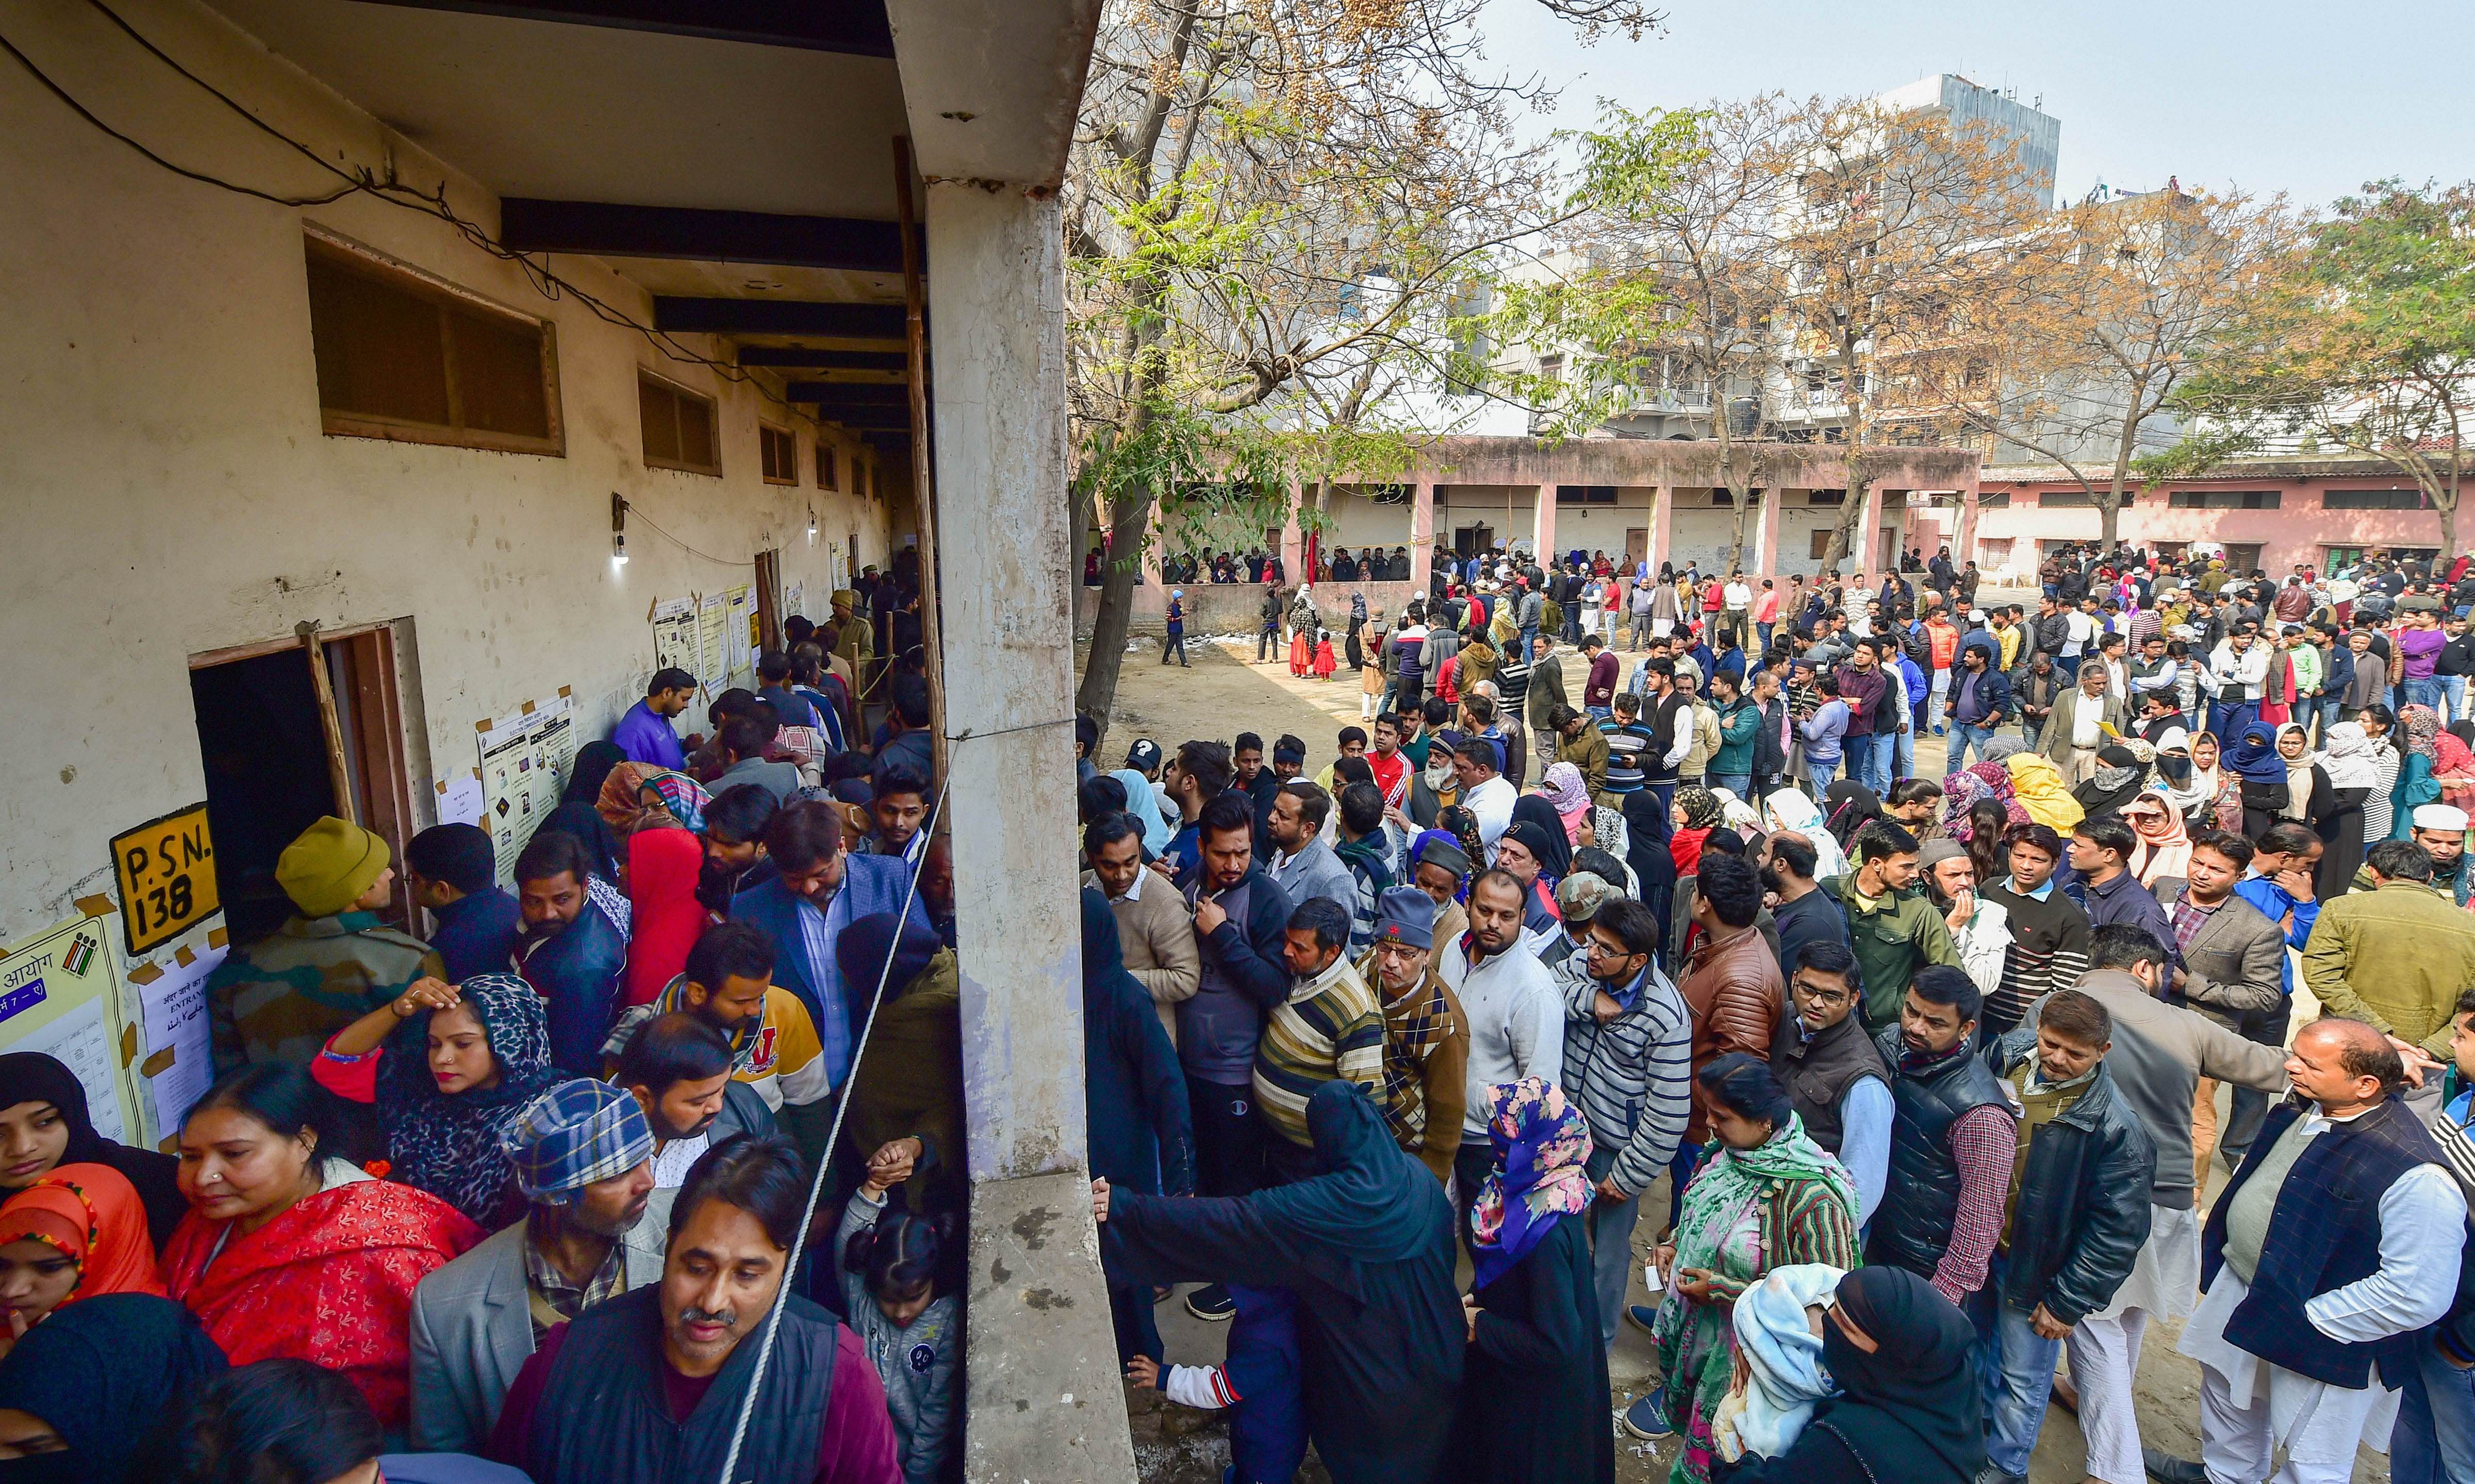 Voters wait in queues at the Abul Kalam Azad school polling station in Shaheen Bagh area, which has been witnessing a peaceful protest against the Citizenship Act for several weeks, during the Delhi Assembly elections, in New Delhi. (PTI Photo)